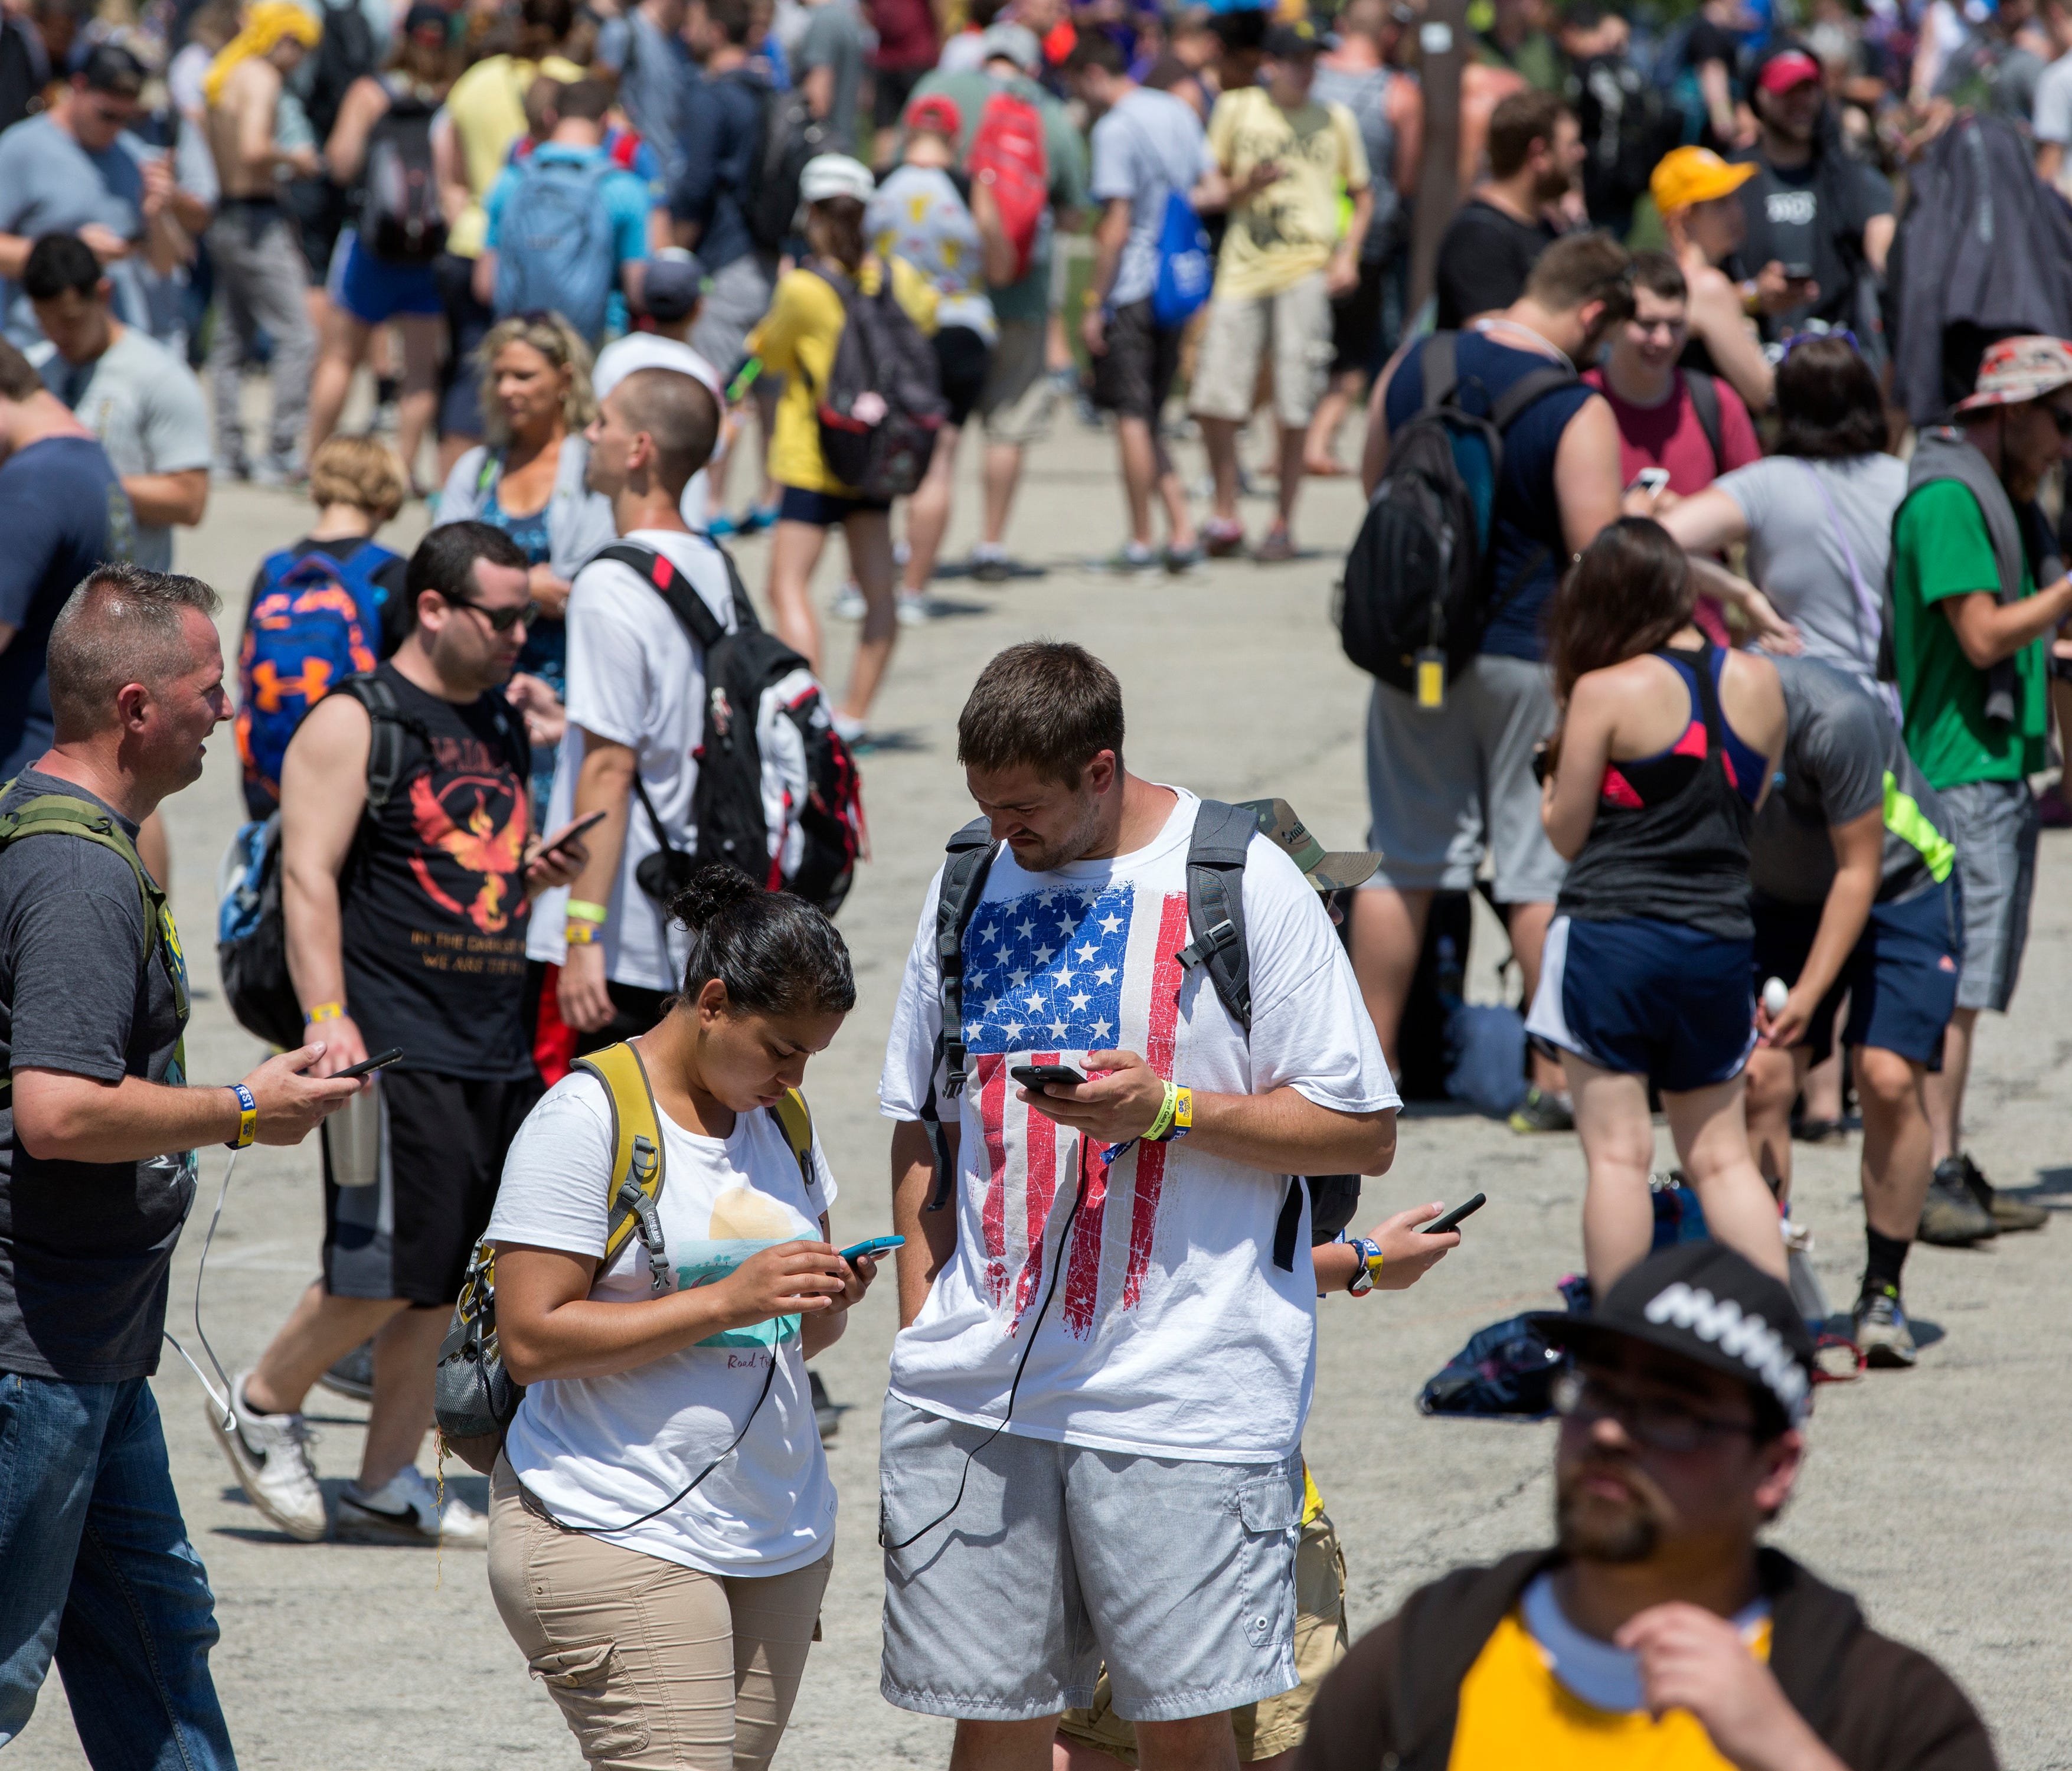 Festival goers wander the grounds at the Pokemon Go Fest Saturday, July 22, 2017, at Grant Park in Chicago. Many festival attendees had trouble getting the augmented-reality cellphone game to work.